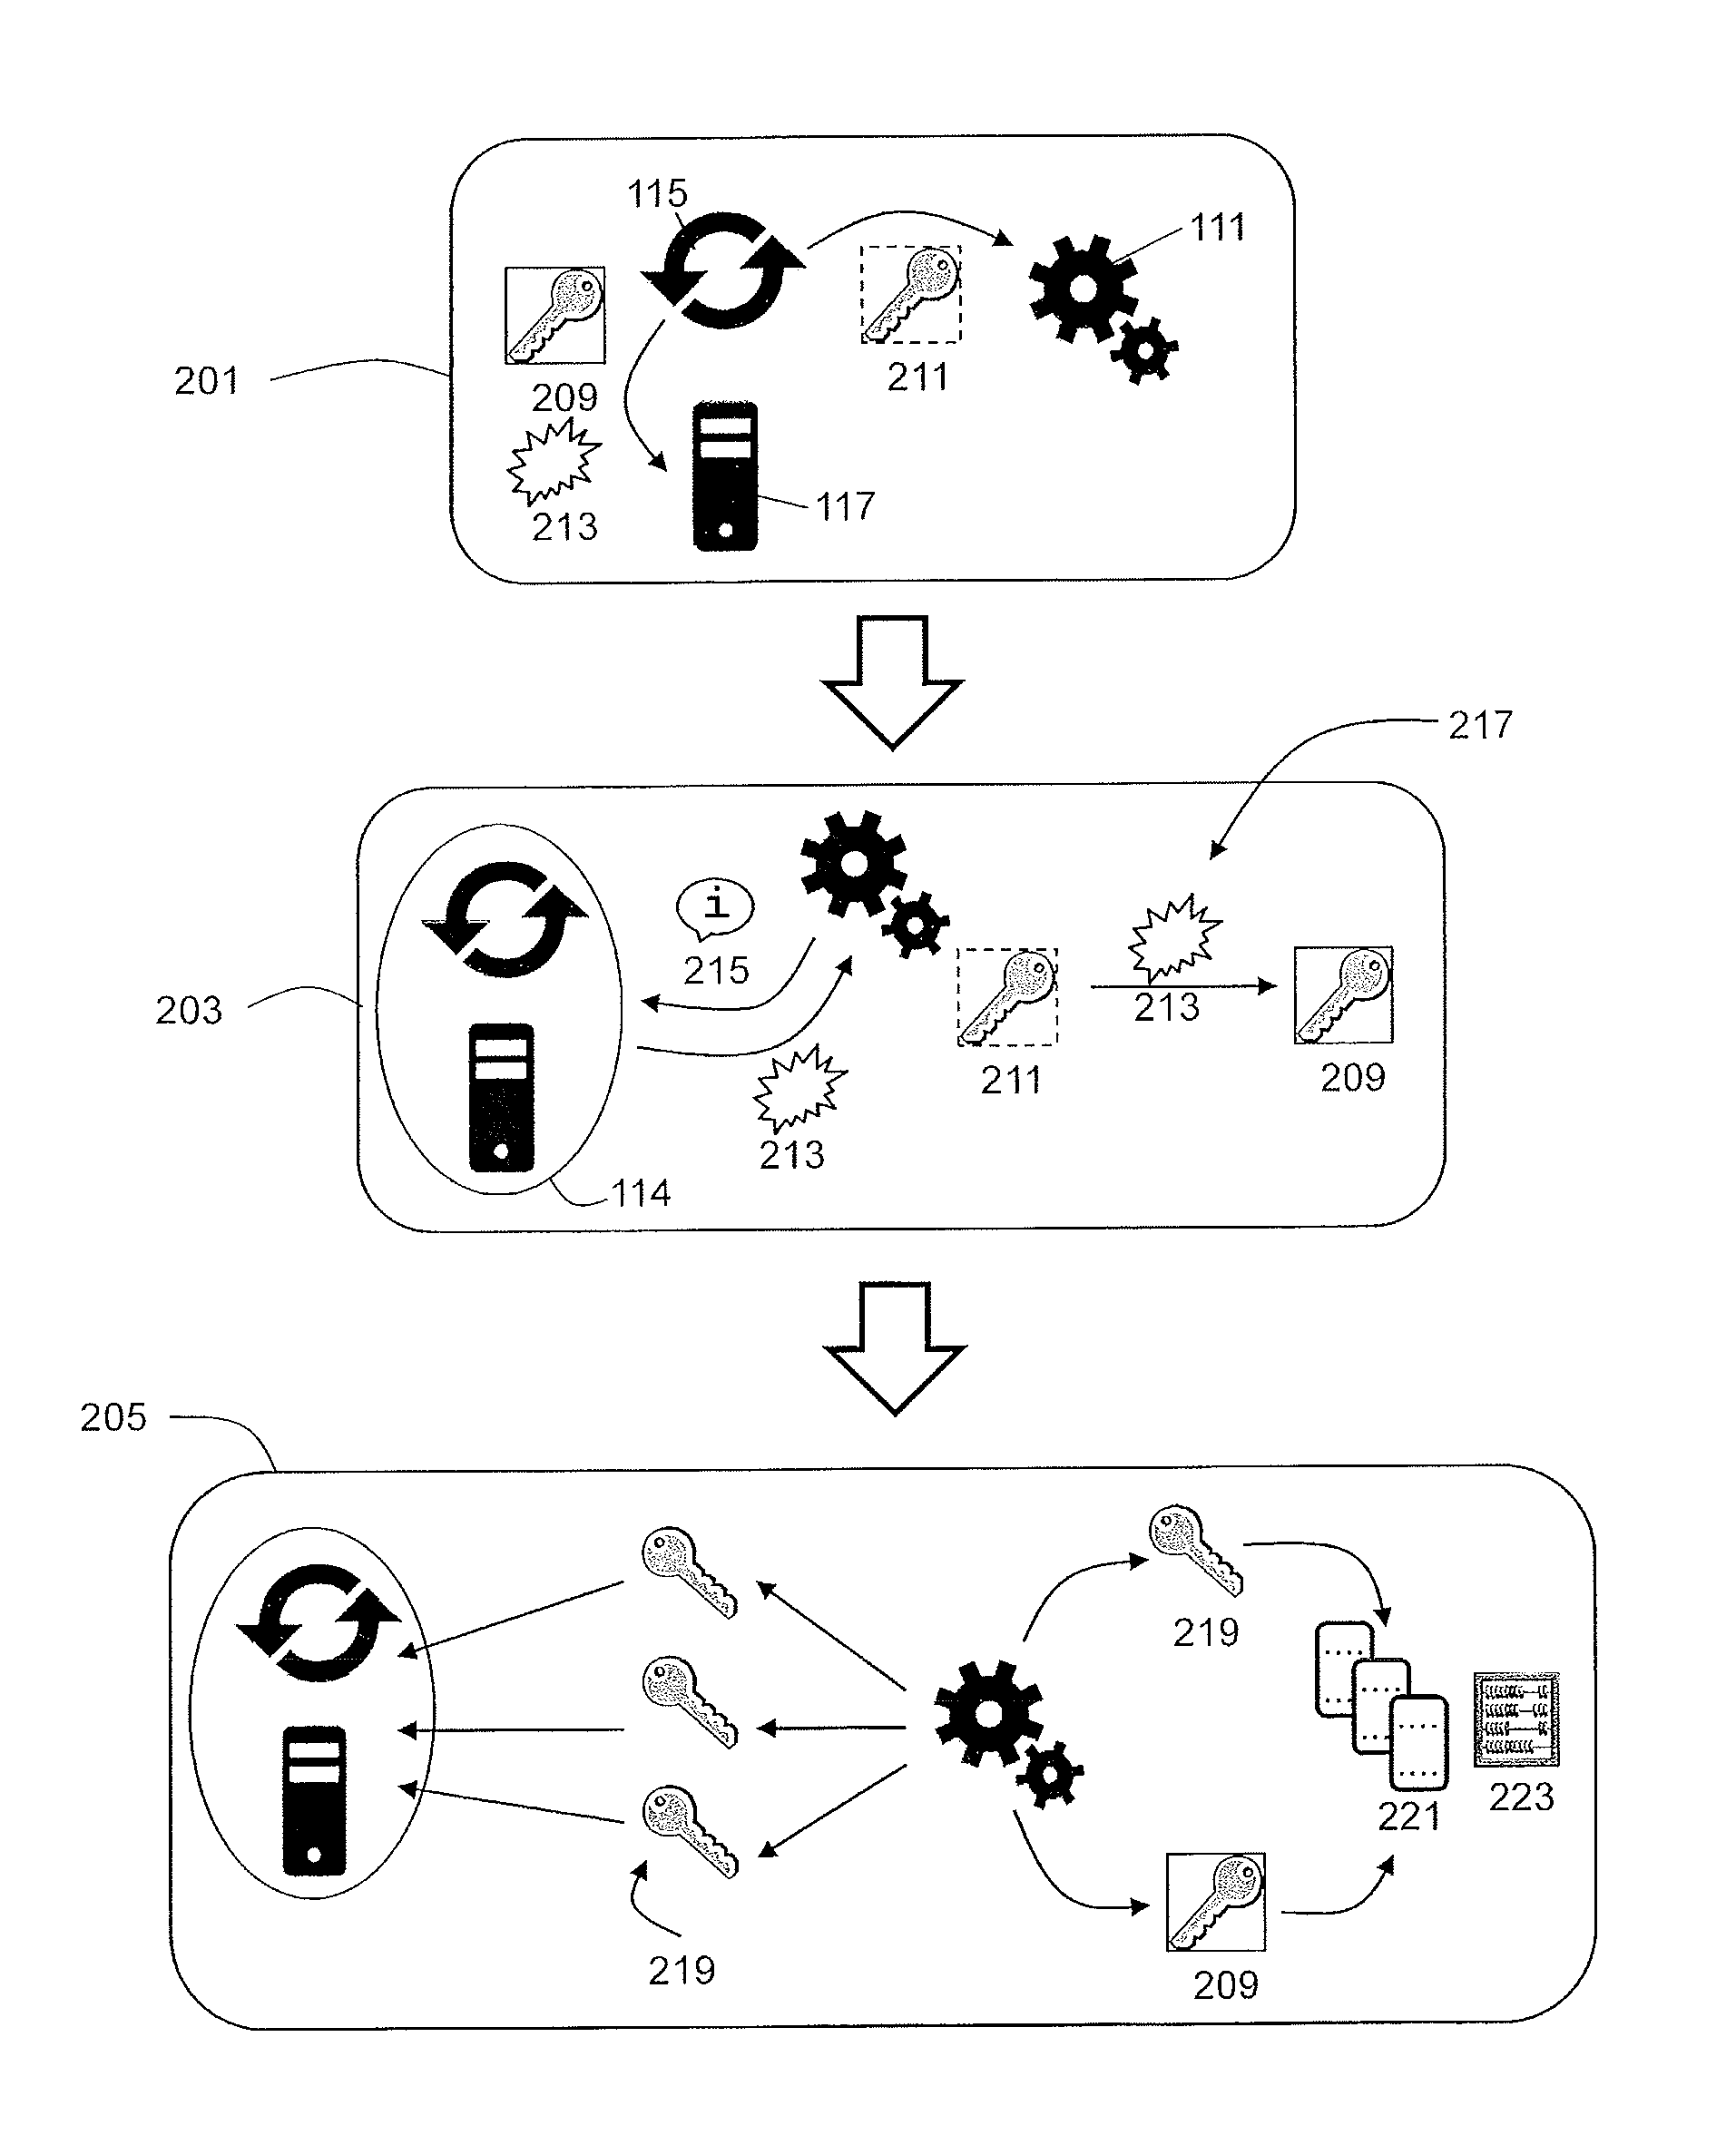 Method and apparatus for marking manufactured items